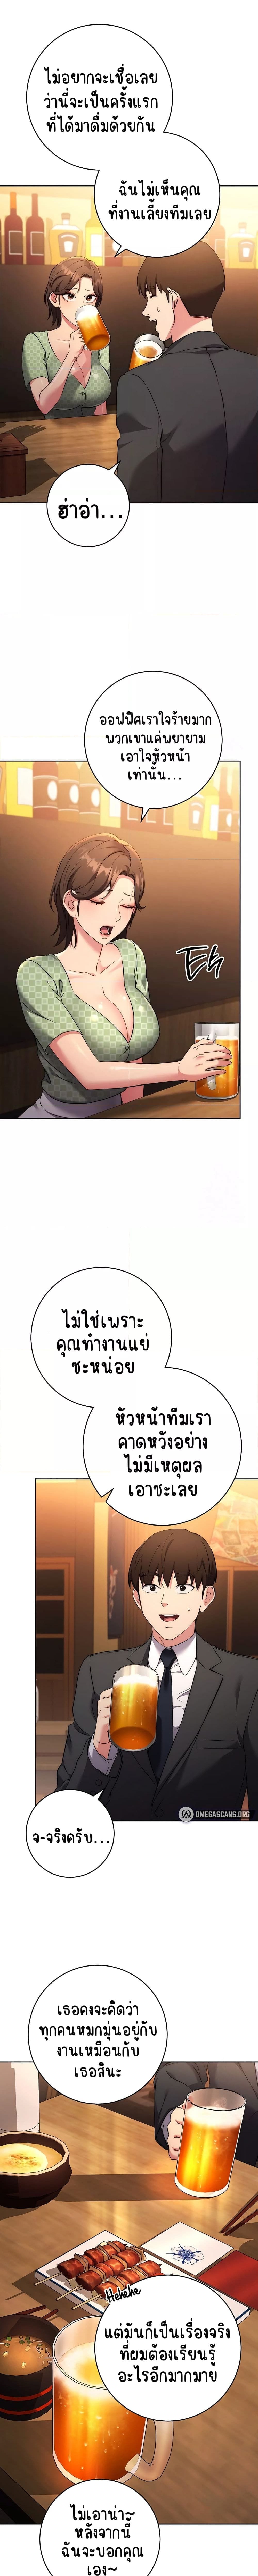 Outsider: The Invisible Man ตอนที่ 7 ภาพ 13